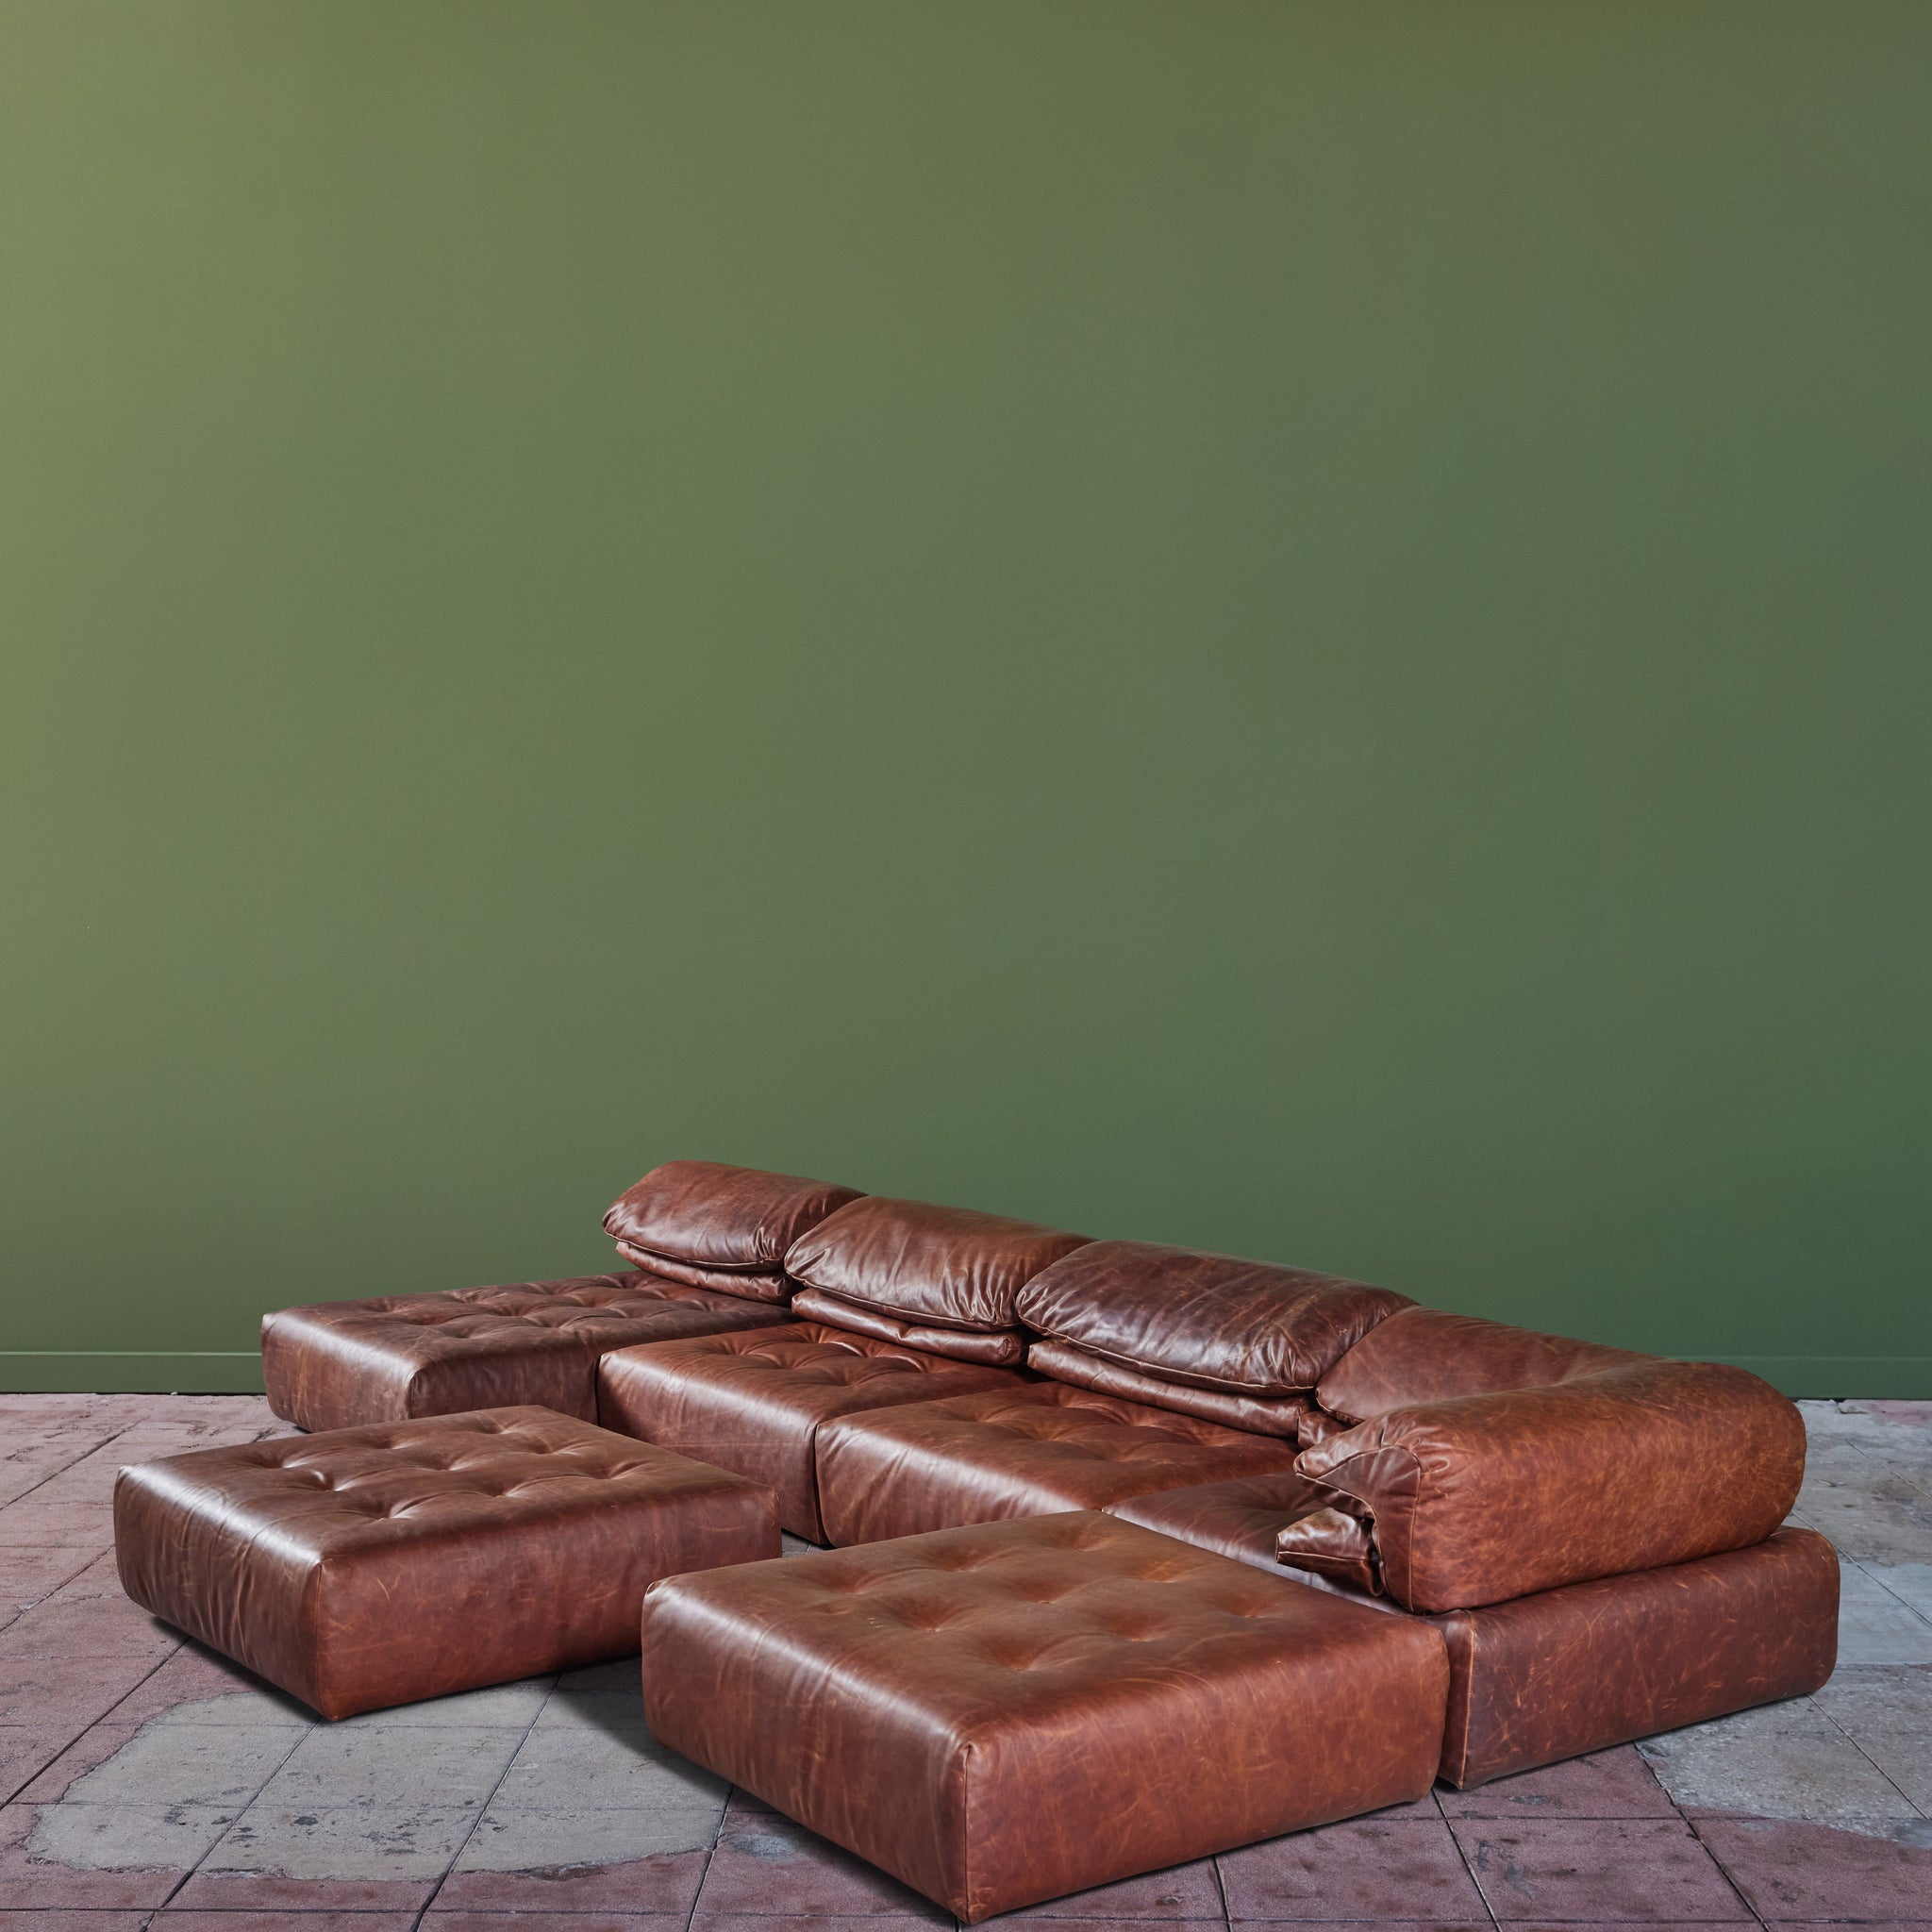 Roche Bobois Voyage Immobile Leather Modular Sectional Sofa